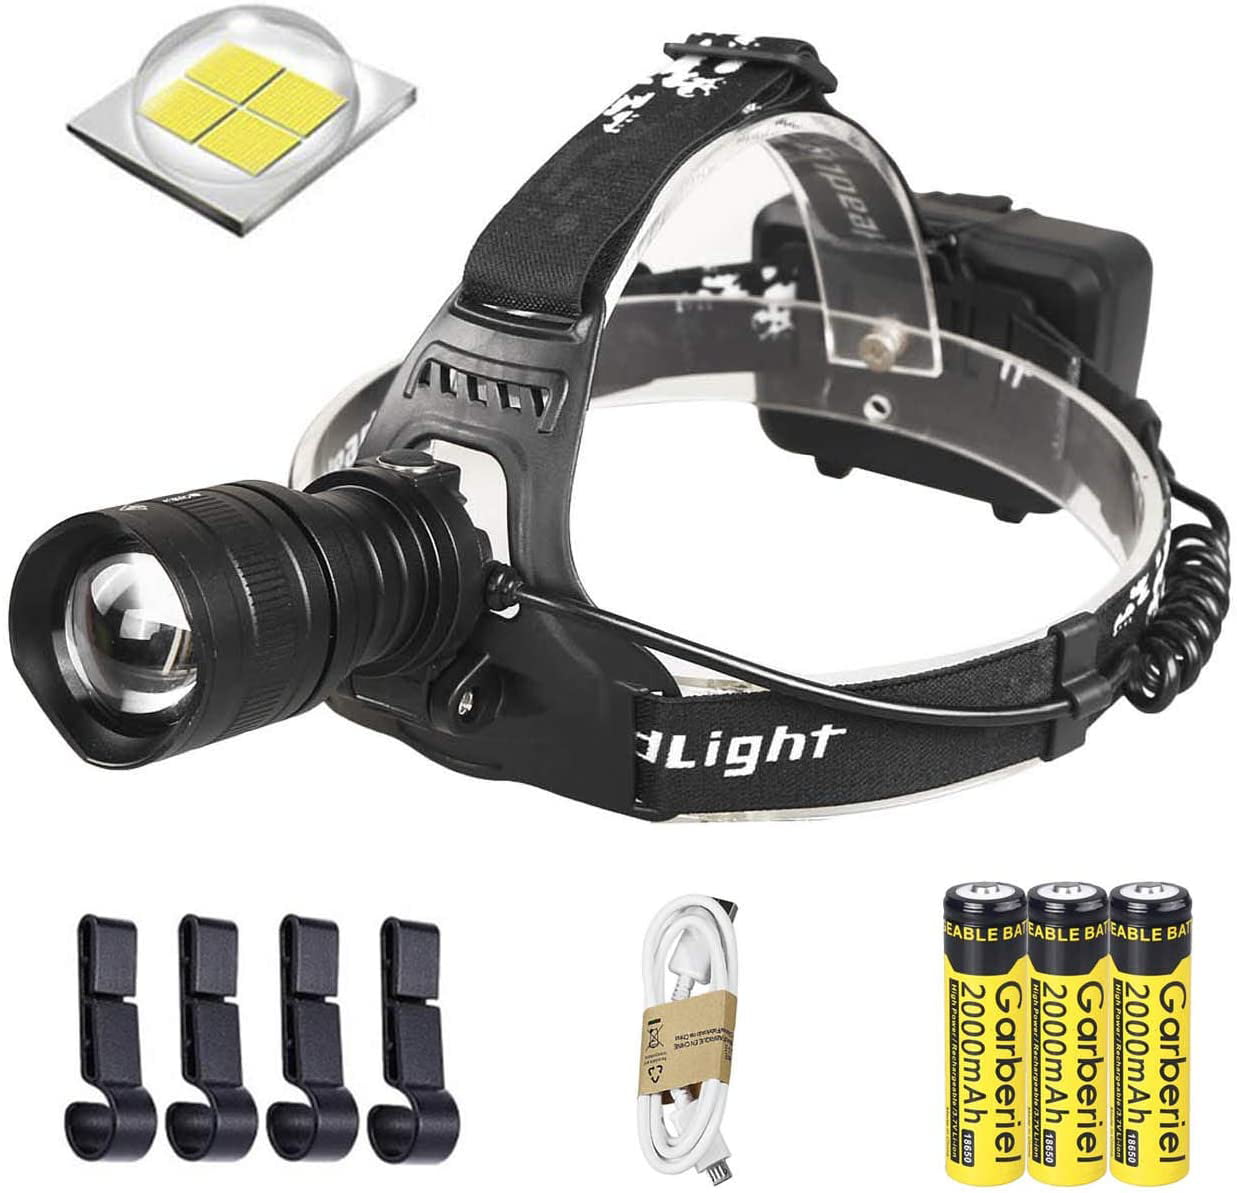 4*350000LM T6 LED Zoomable Headlamp USB Rechargeable Work Light 18*650 Headlight 